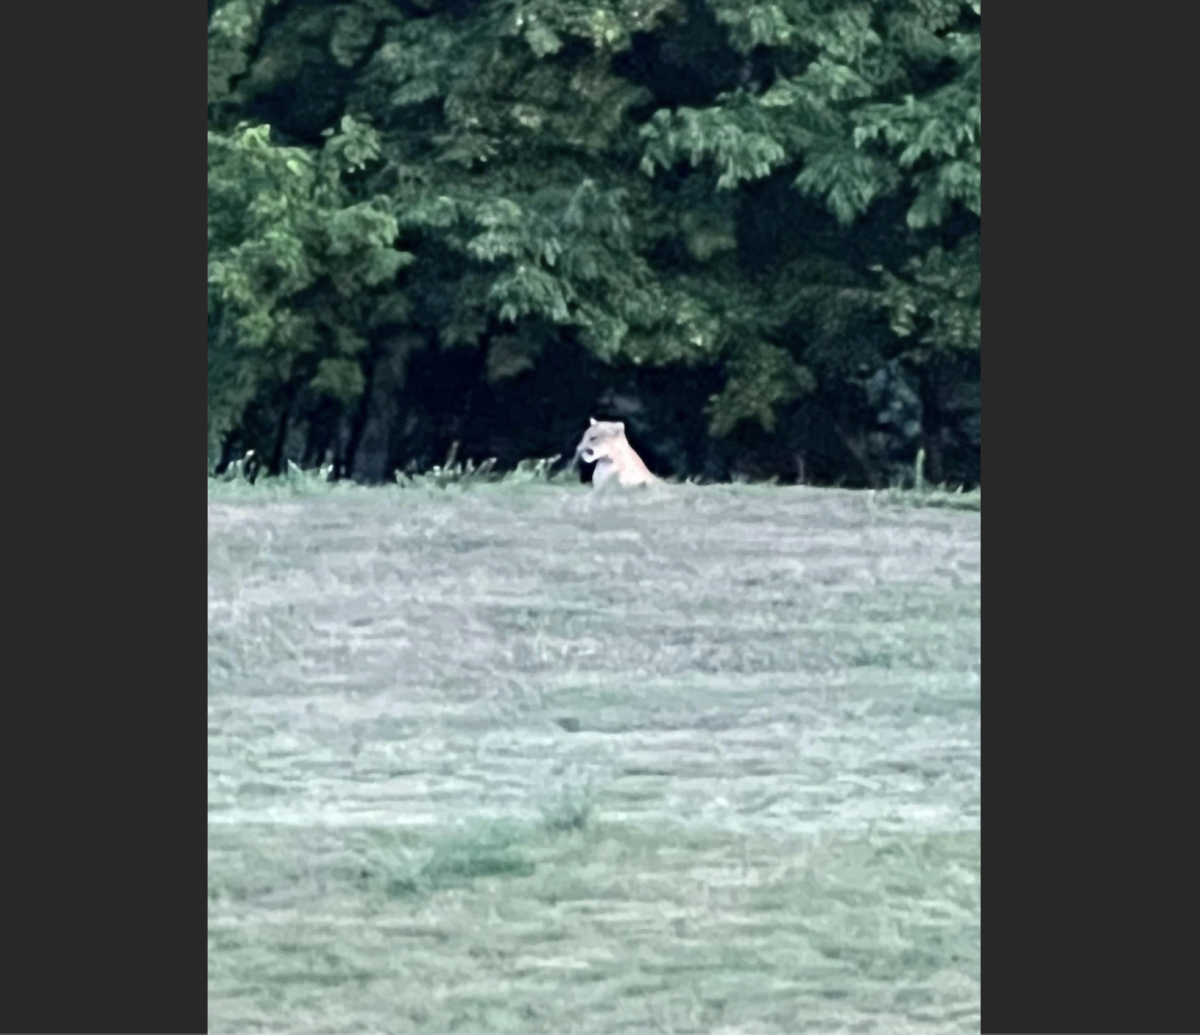 A mountain lion spotted near Preserve Trail and Stagecoach Road in Shakopee on July 18, 2022. Photo by Andrew Pastrana.